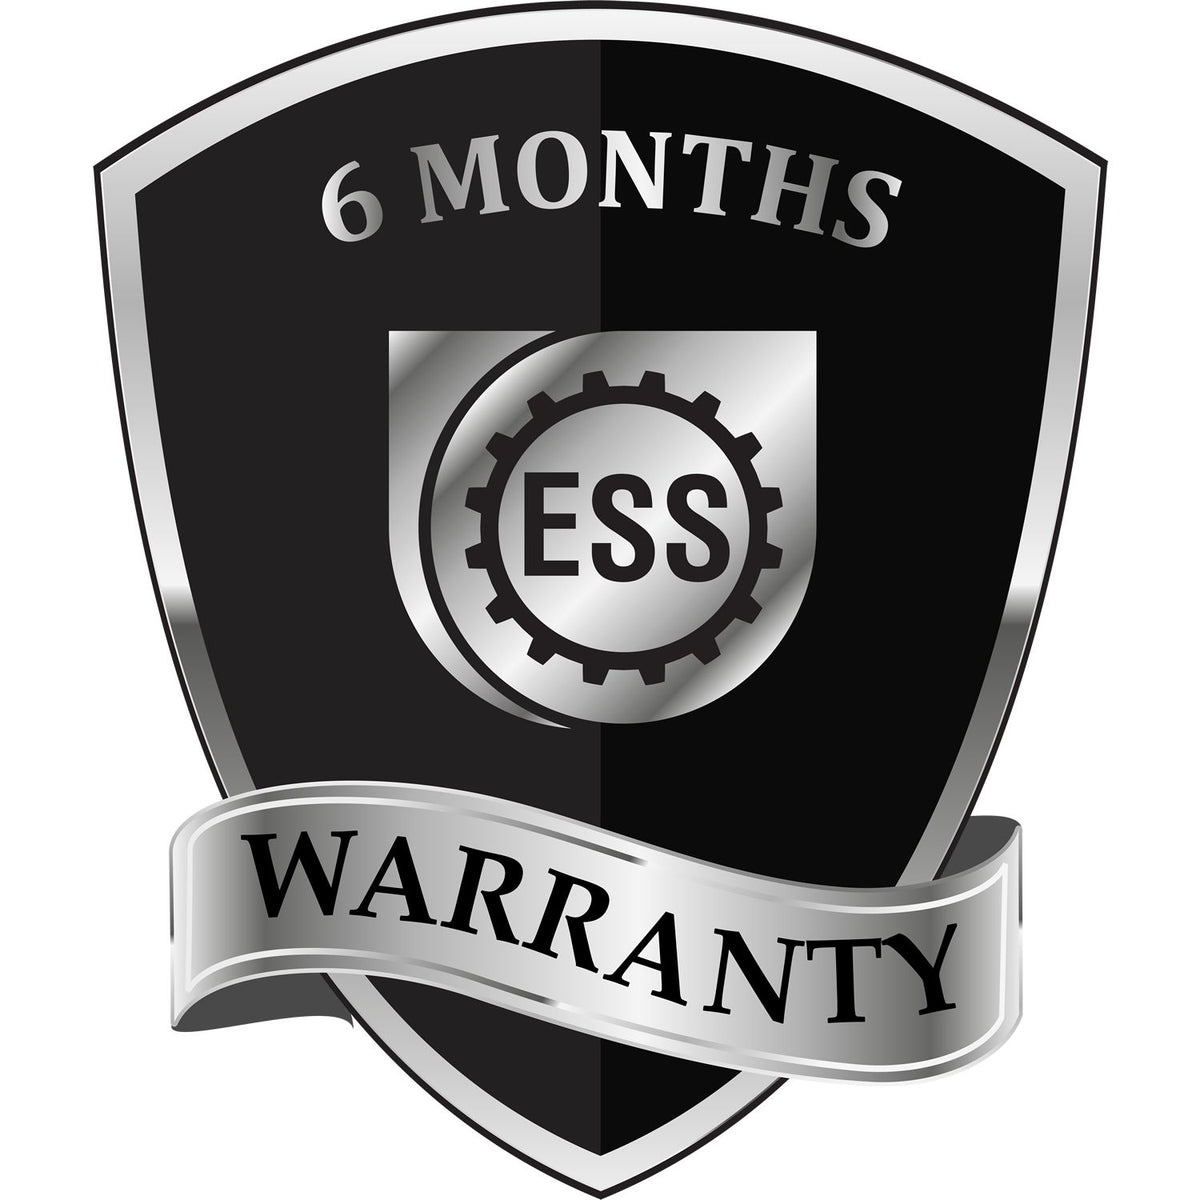 A badge or emblem showing a warranty icon for the Alaska Professional Engineer Seal Stamp